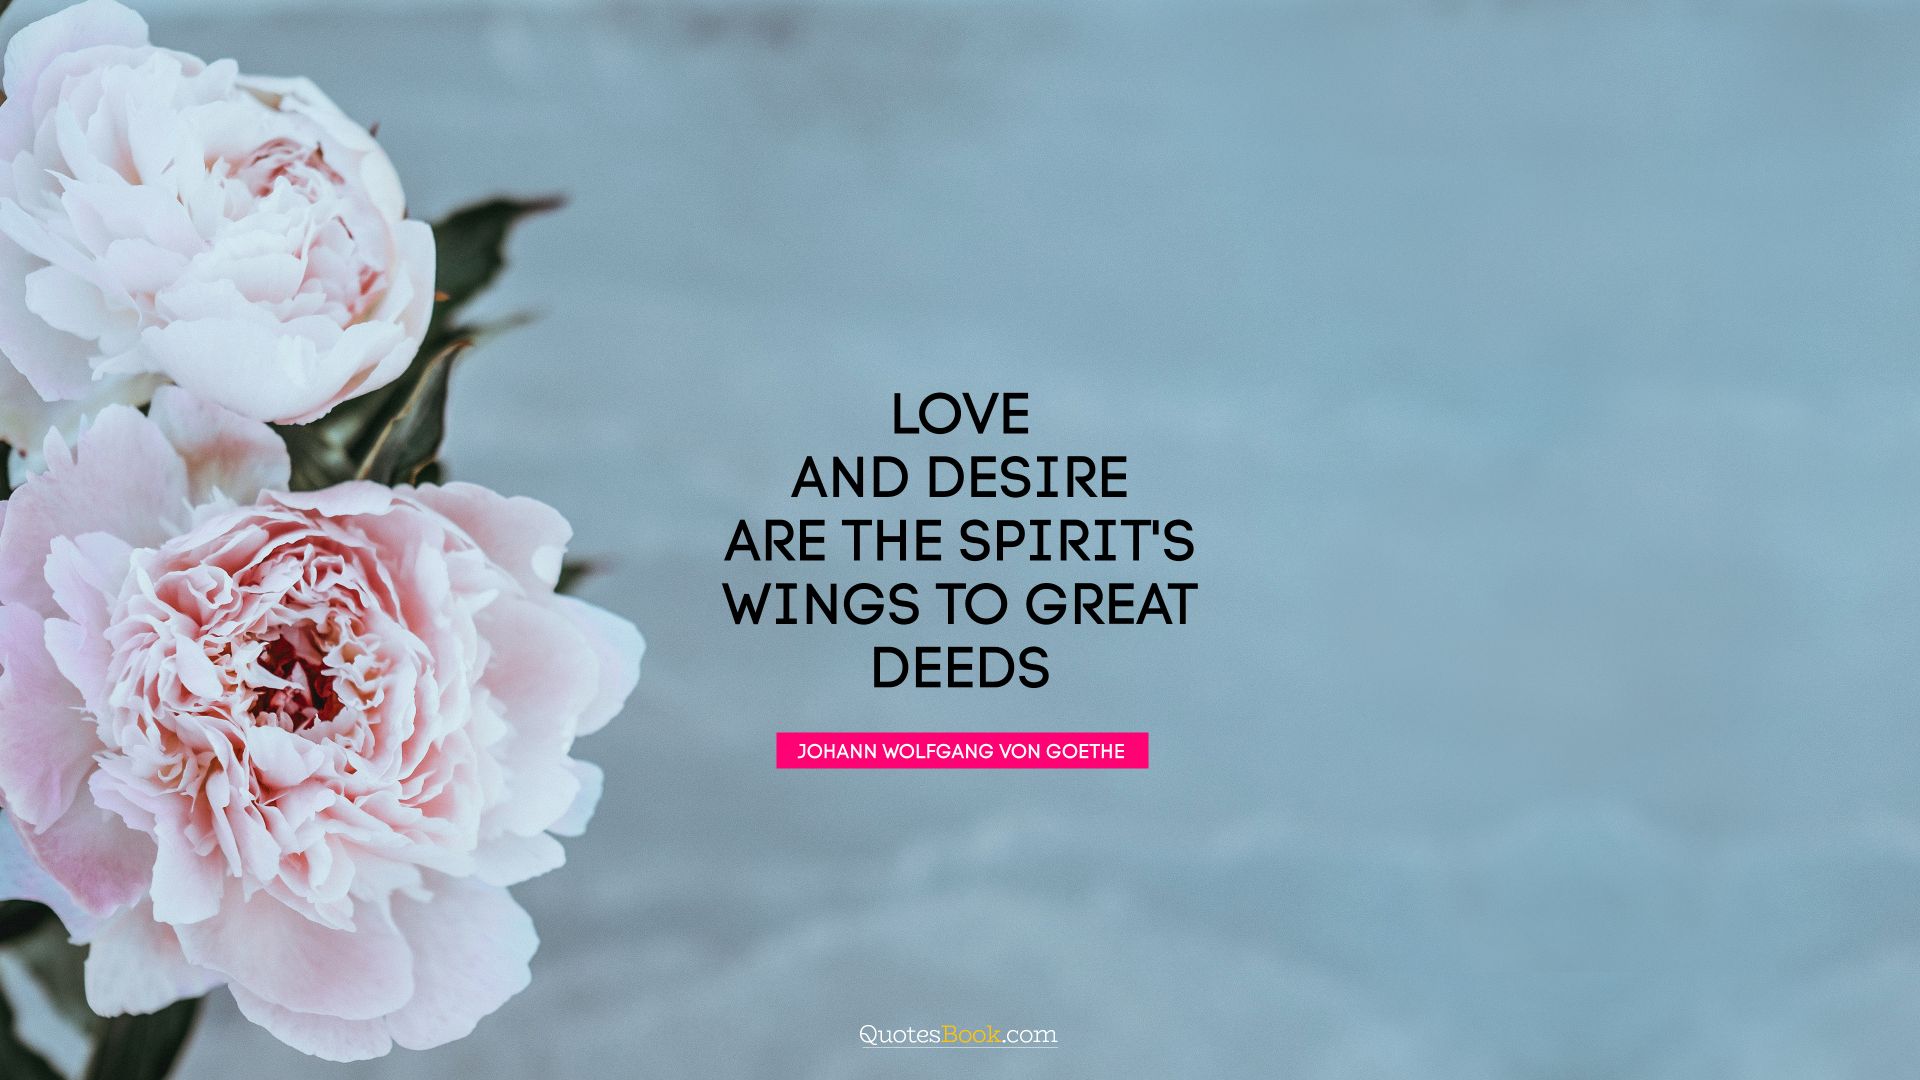 Love and desire are the spirit's wings to great deeds. - Quote by Johann Wolfgang von Goethe